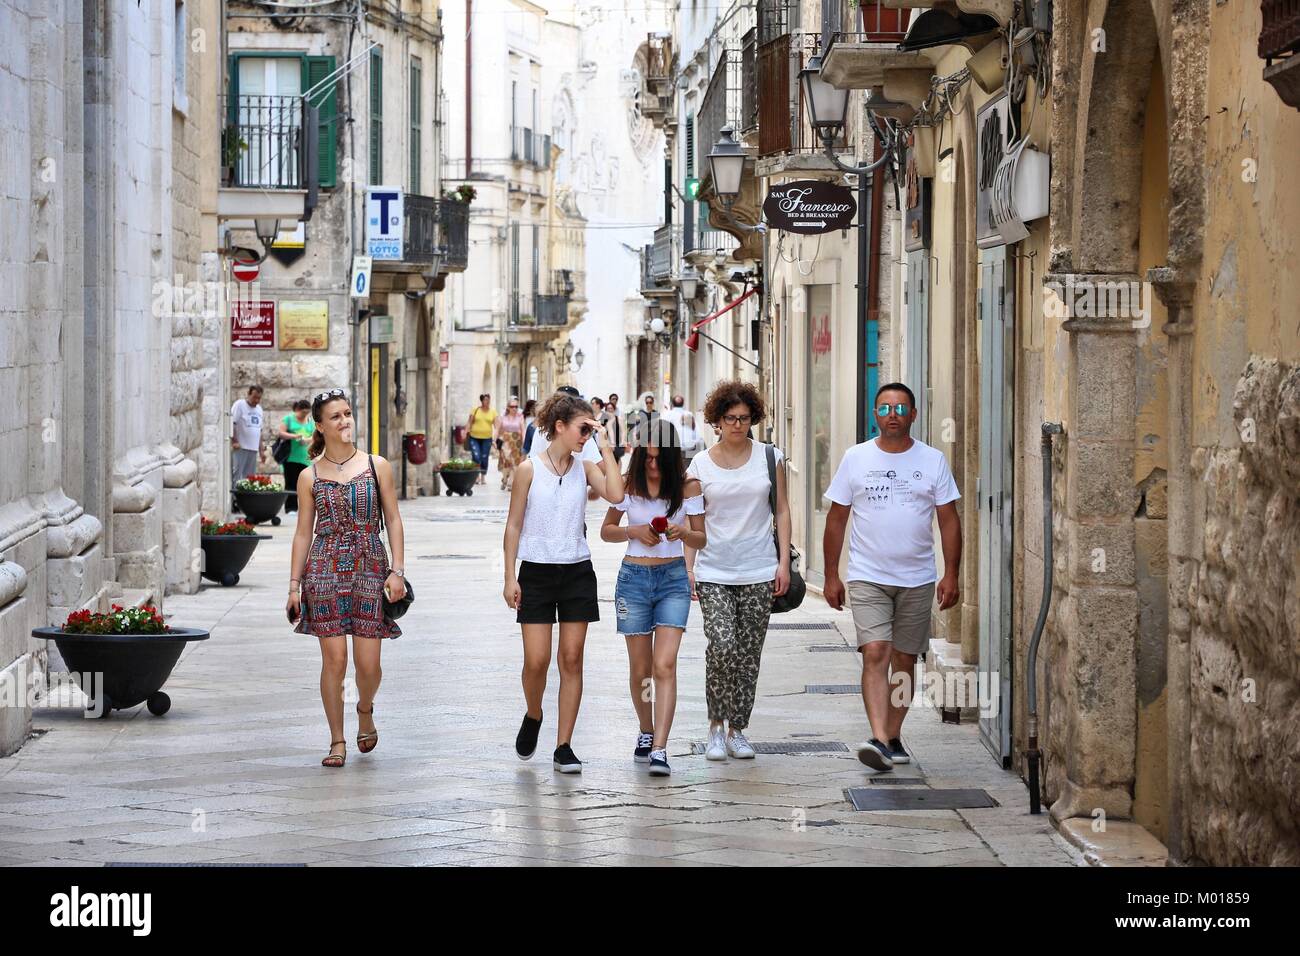 ALTAMURA, ITALY - JUNE 4, 2017: People visit Old Town of Altamura in Italy. Altamura is a major city in Apulia, with population of 70,556. Stock Photo